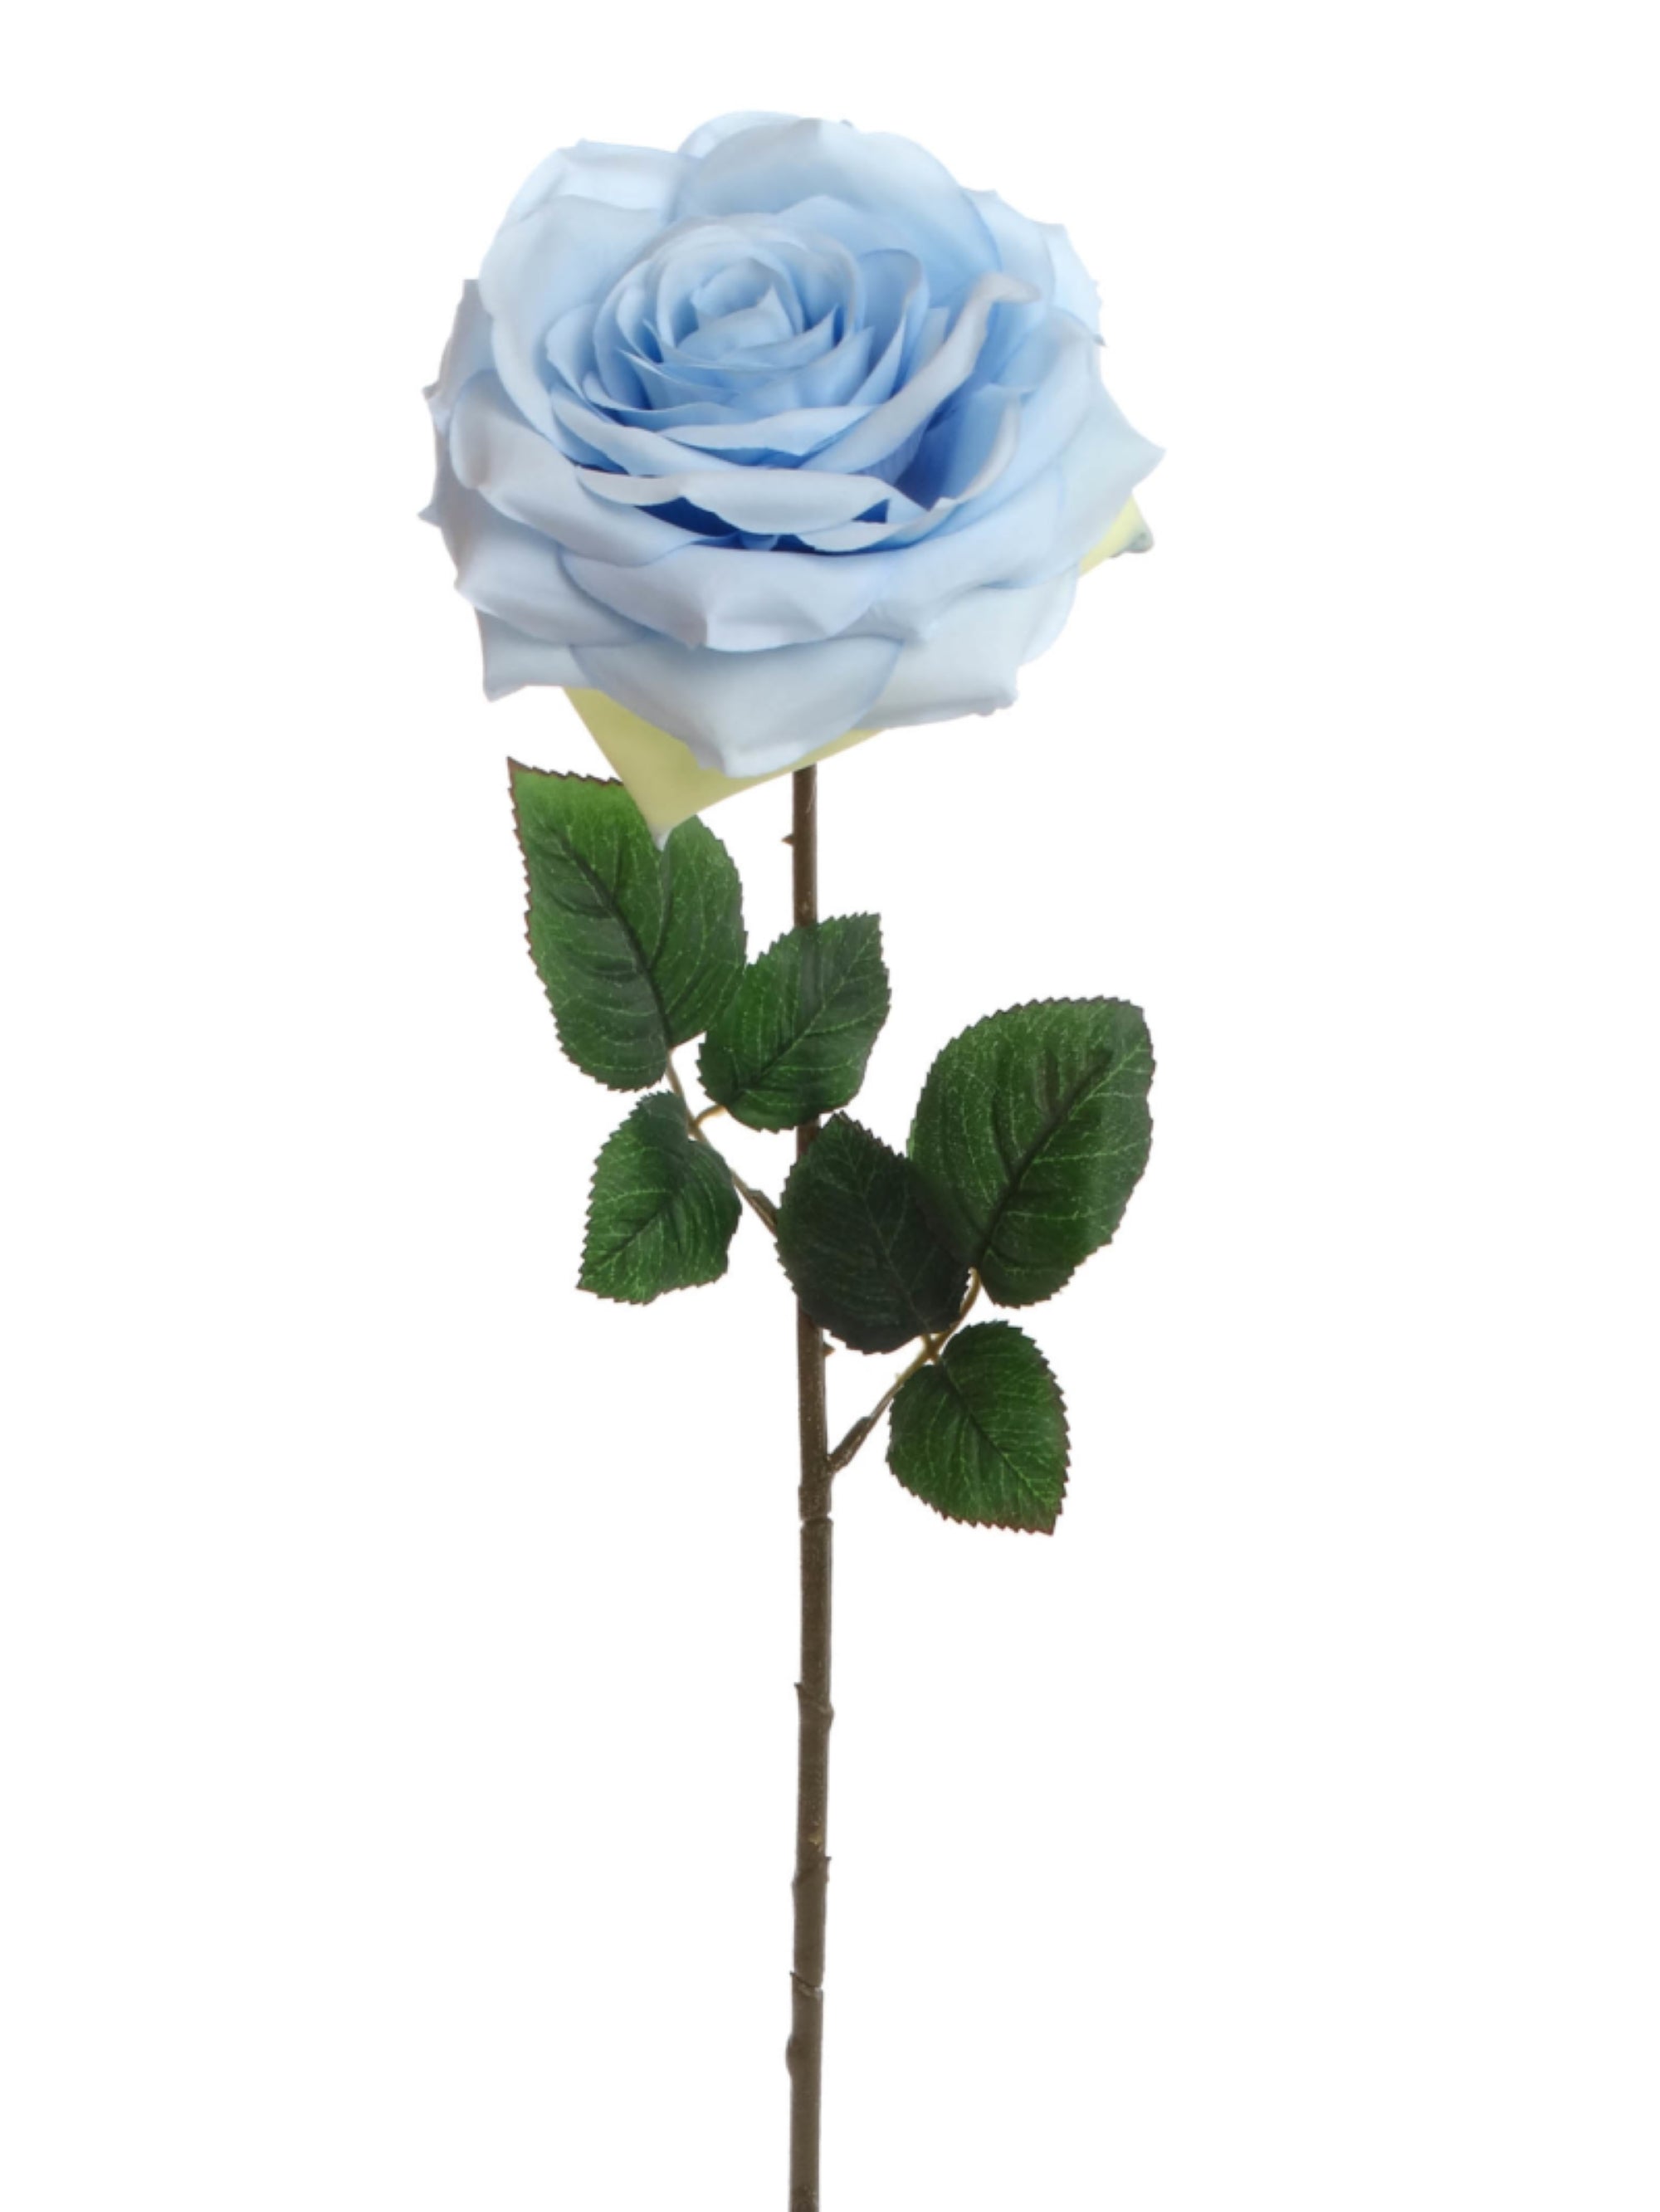 Elegant Set of 12 Blue 20" Open Rose Silk Flowers | Stunning Lifelike Blooms with 6" Diameter | Ideal for Home Decor, Weddings, and Events